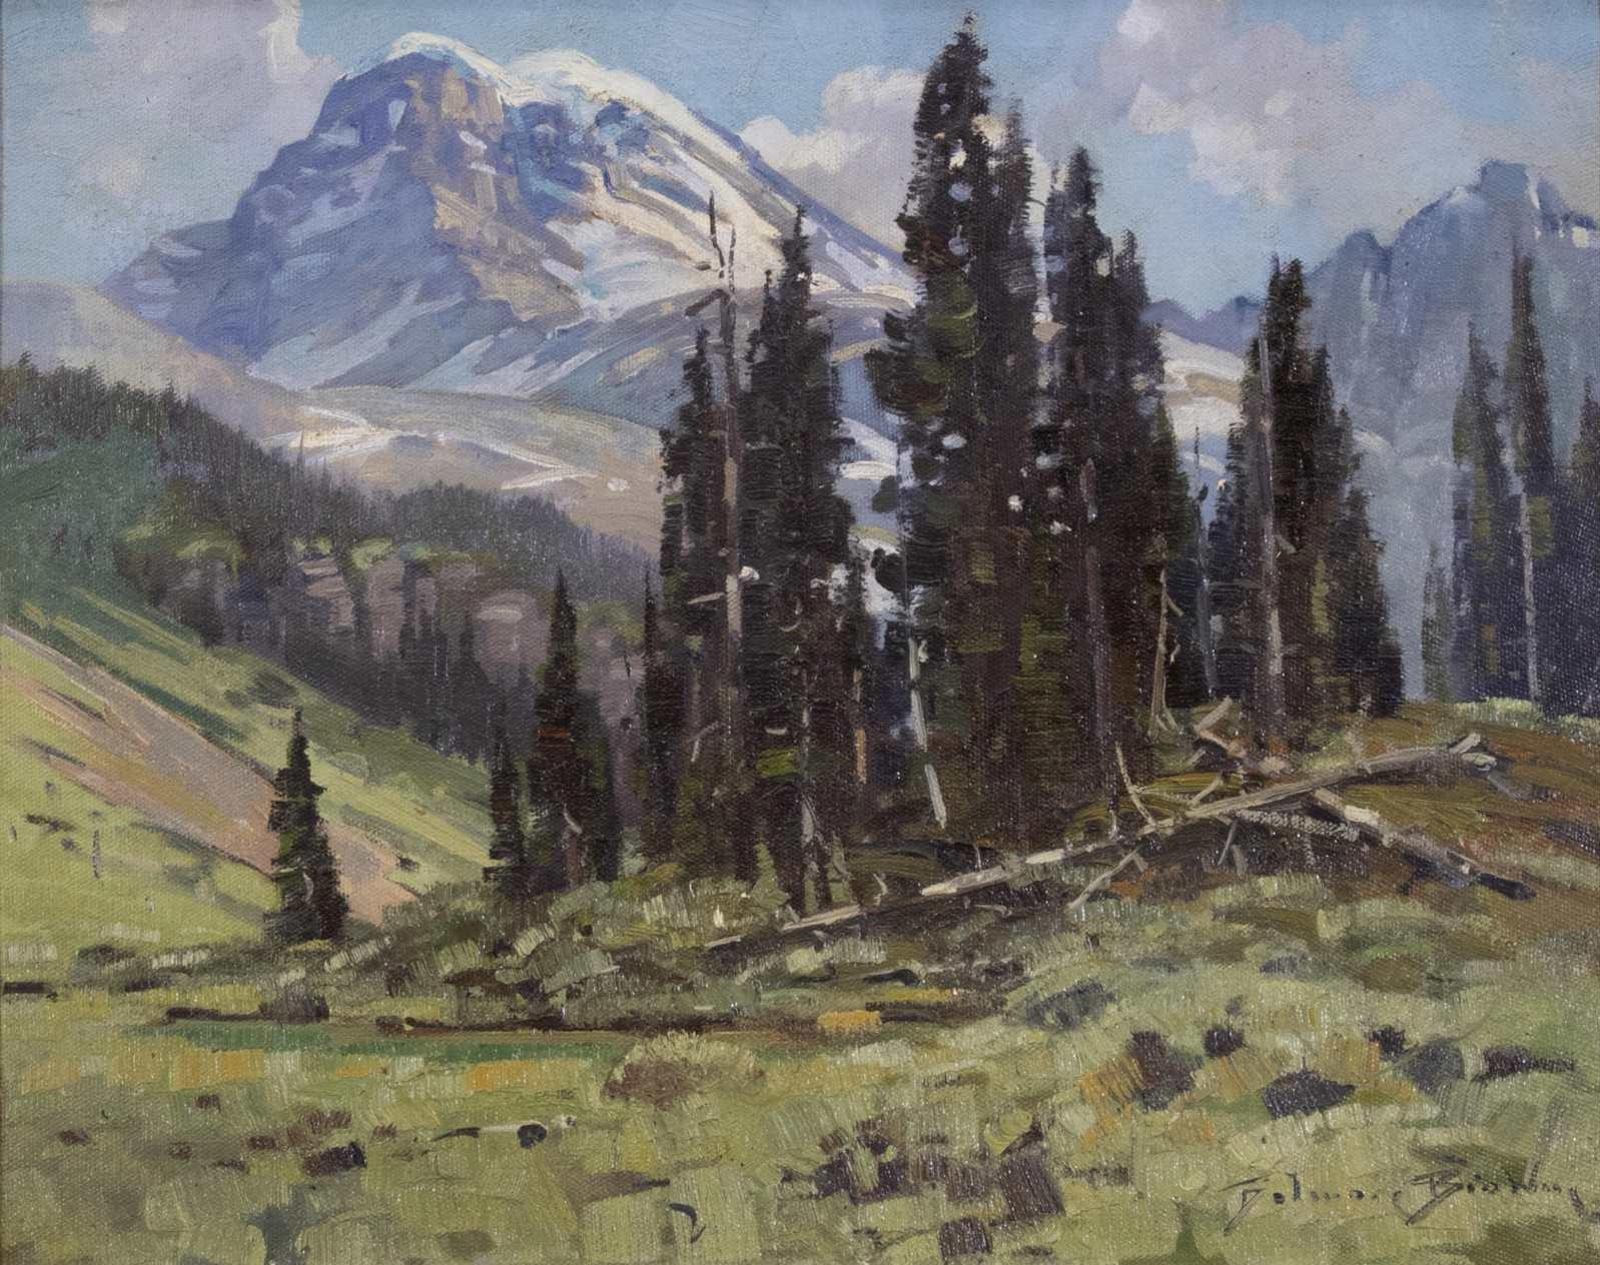 Belmore Browne (1880-1954) - On The Trail To Mt. Assiniboine (The Headwaters Of Brewster Creek)